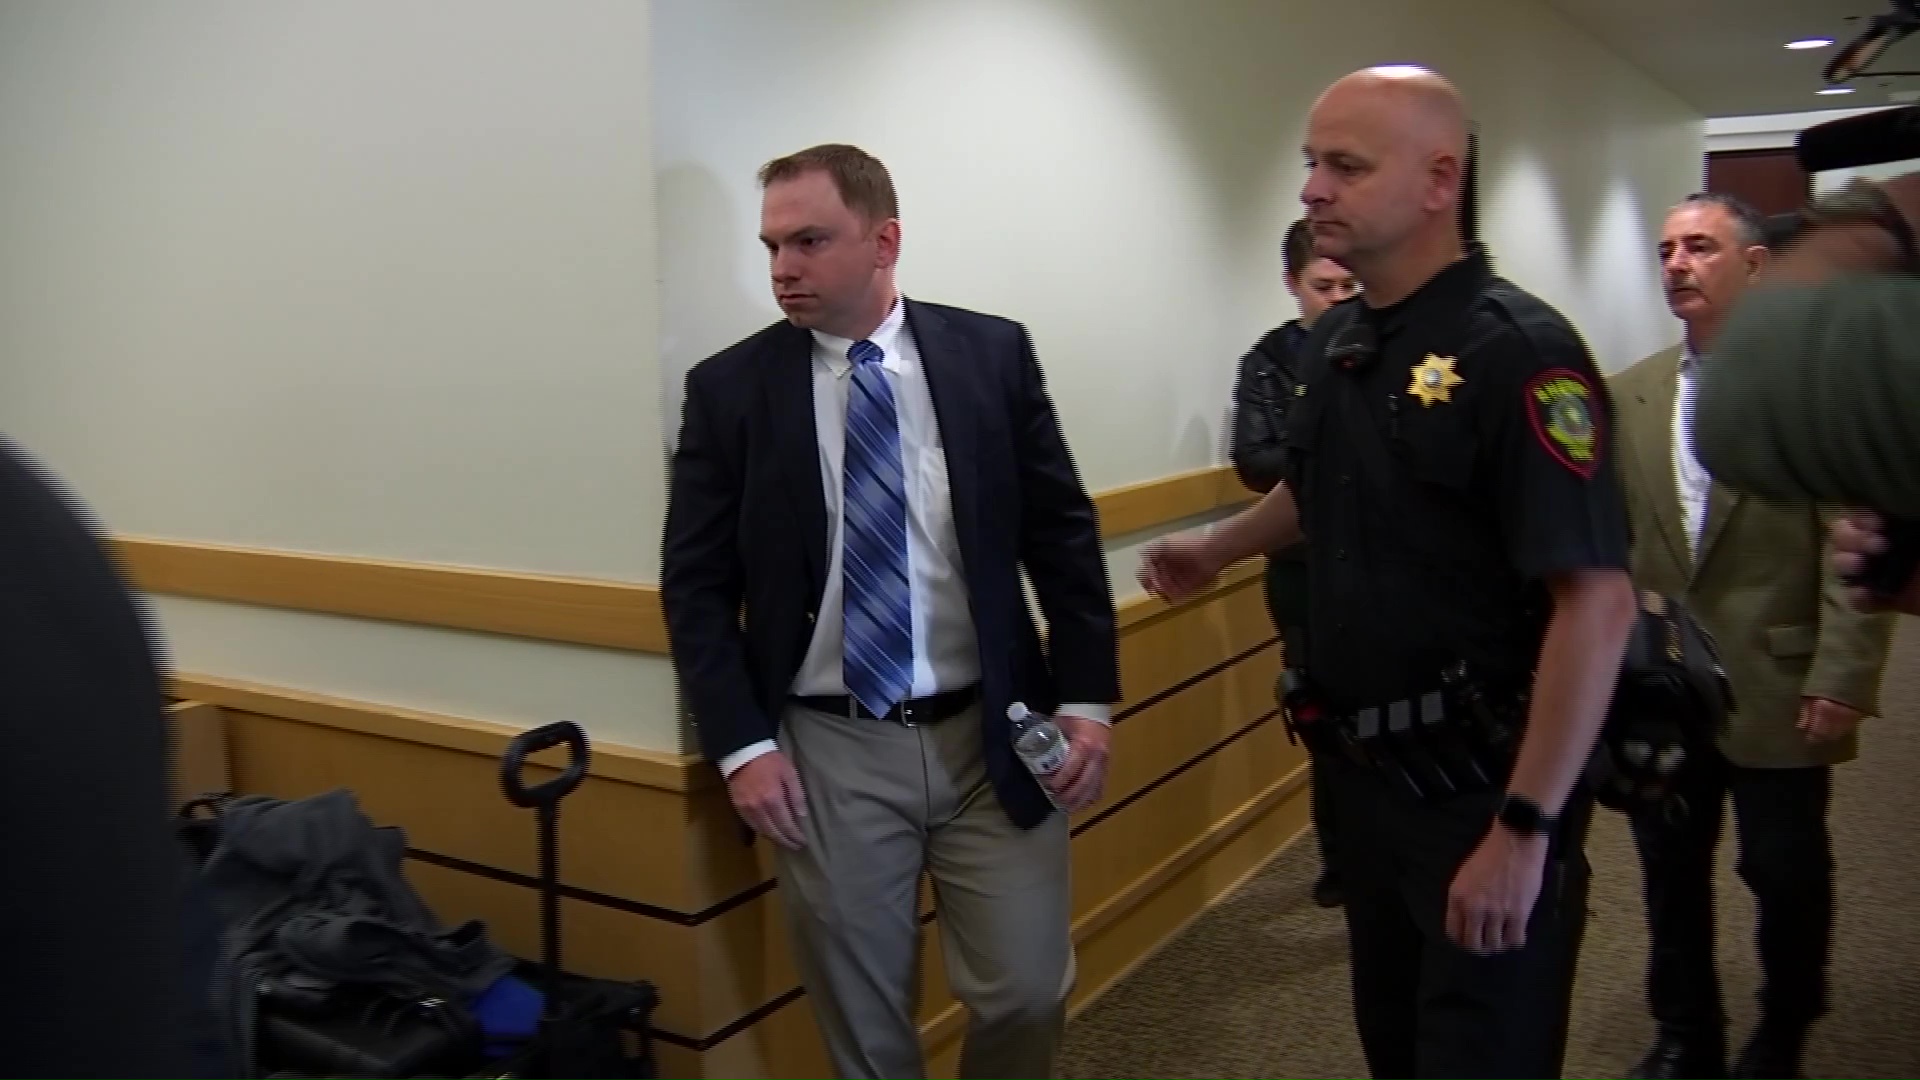 Jury Selection for Murder Trial of Aaron Dean Scheduled to Begin
Monday